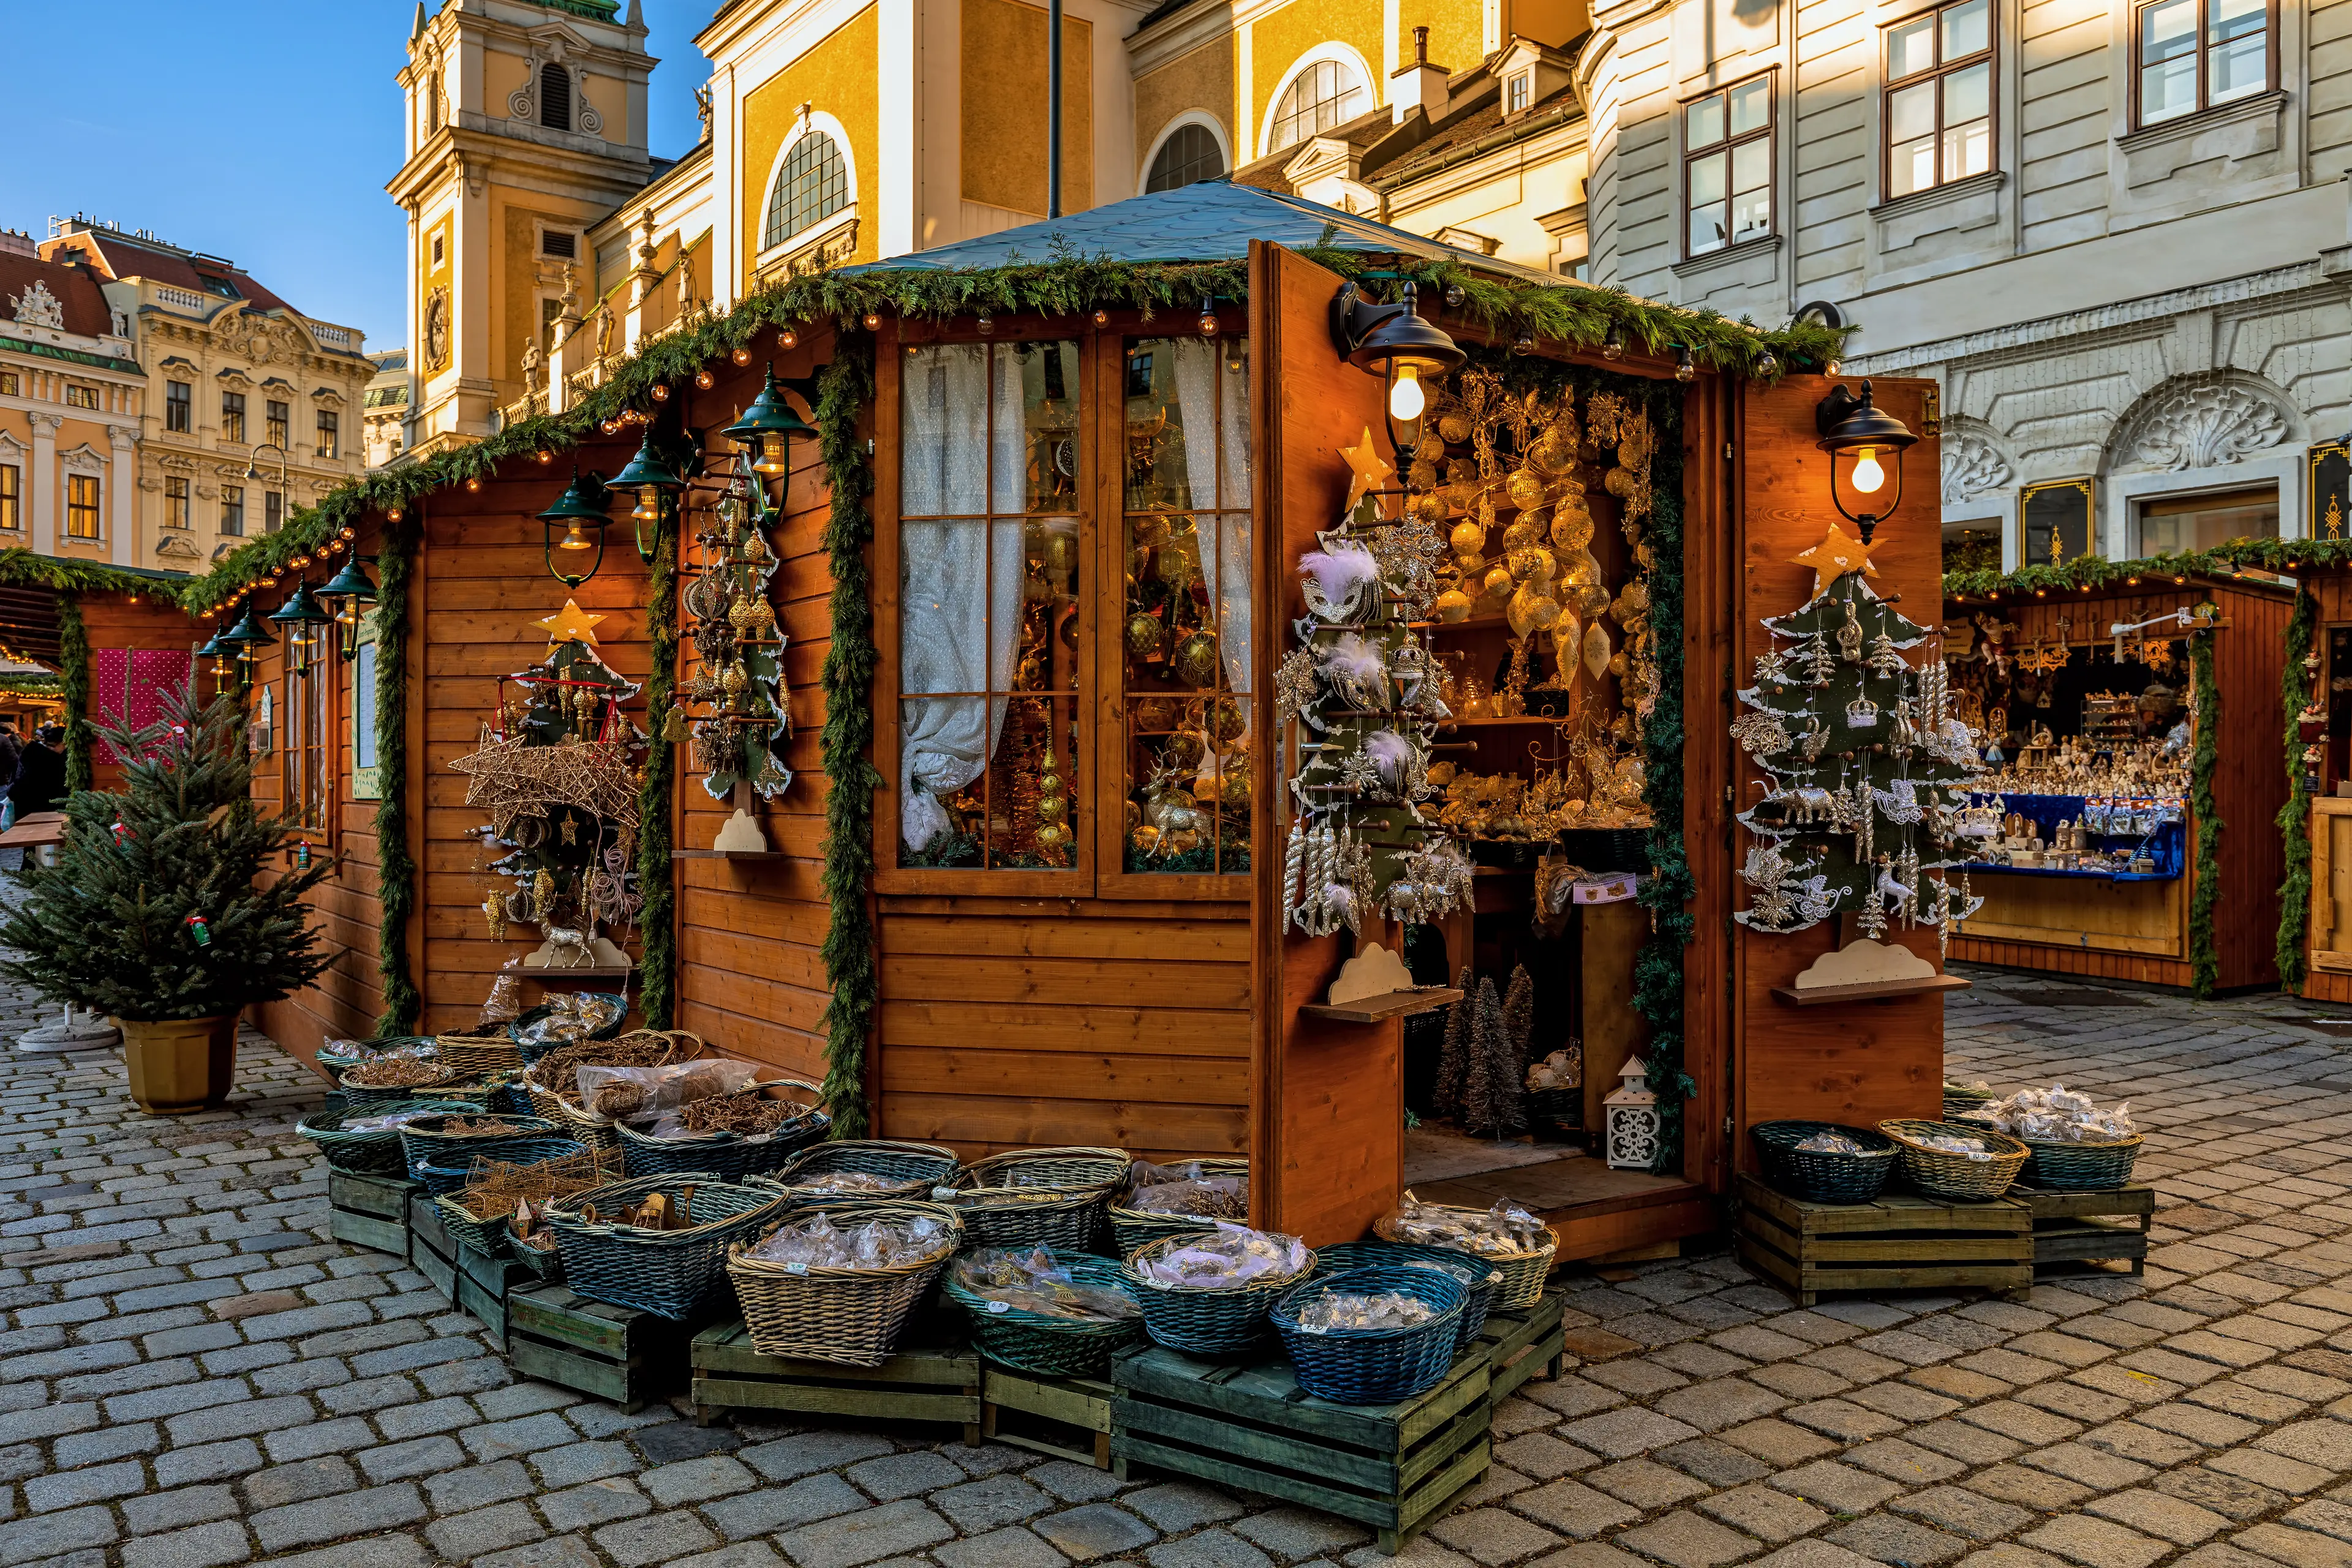 Wooden kiosk with handmade Christmas decorations in Vienna